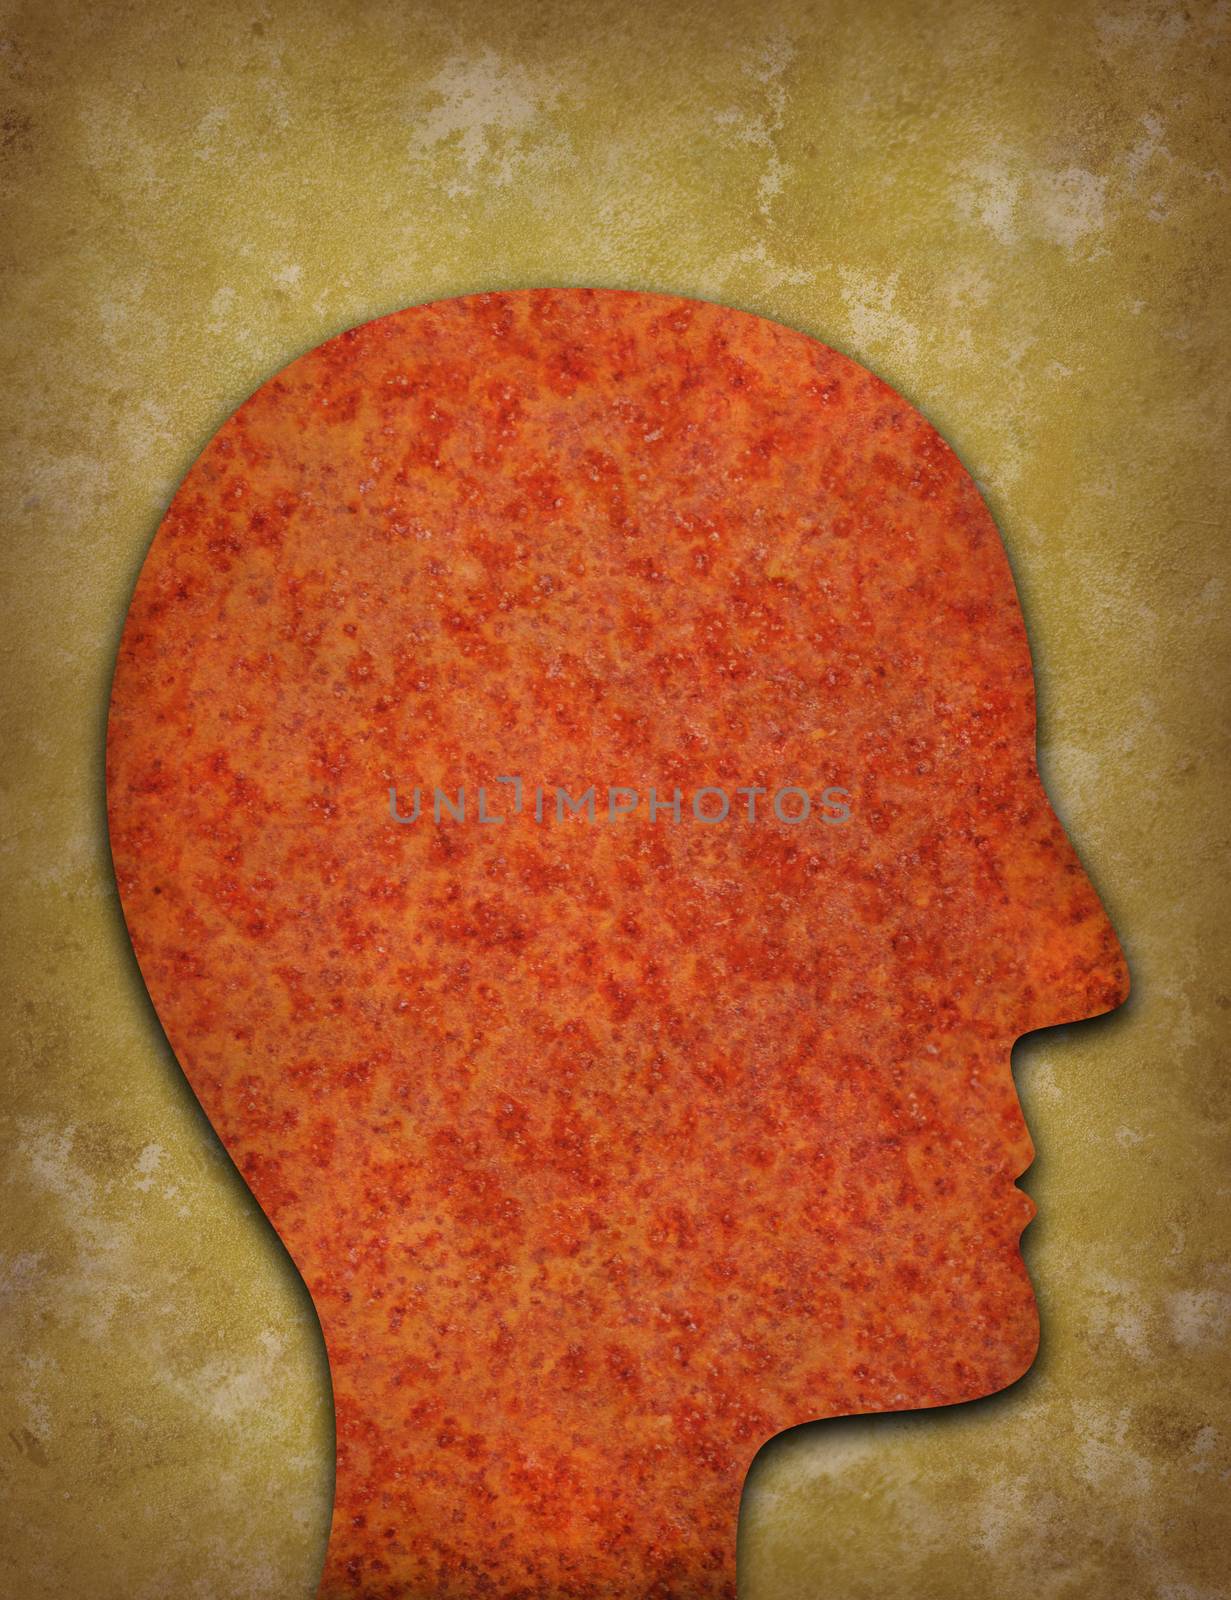 Rusty head silhouette against yellowed background by Balefire9